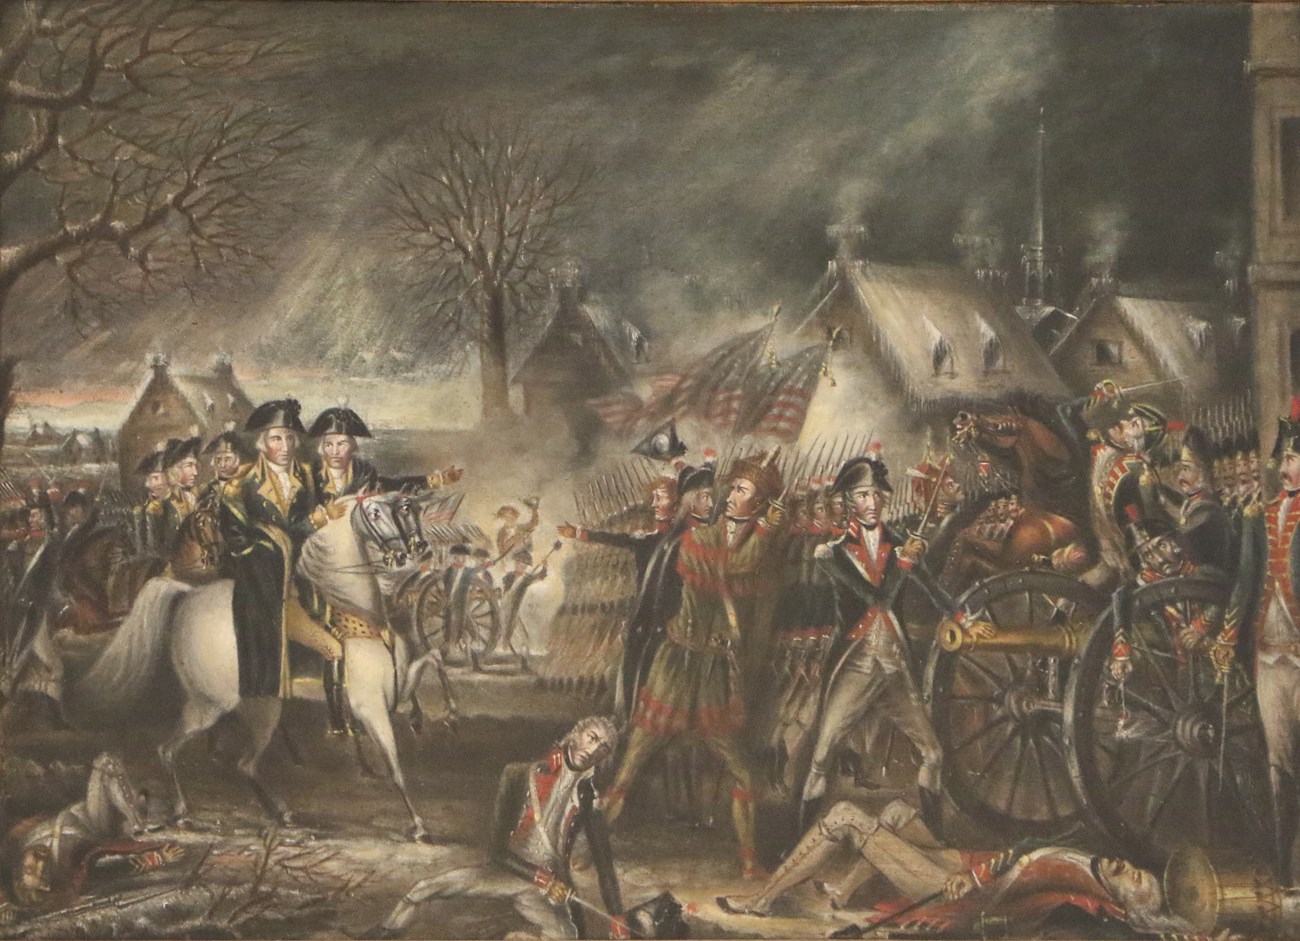 The Battle of Trenton by George Washington Parke Custis on display in the Center Hall.